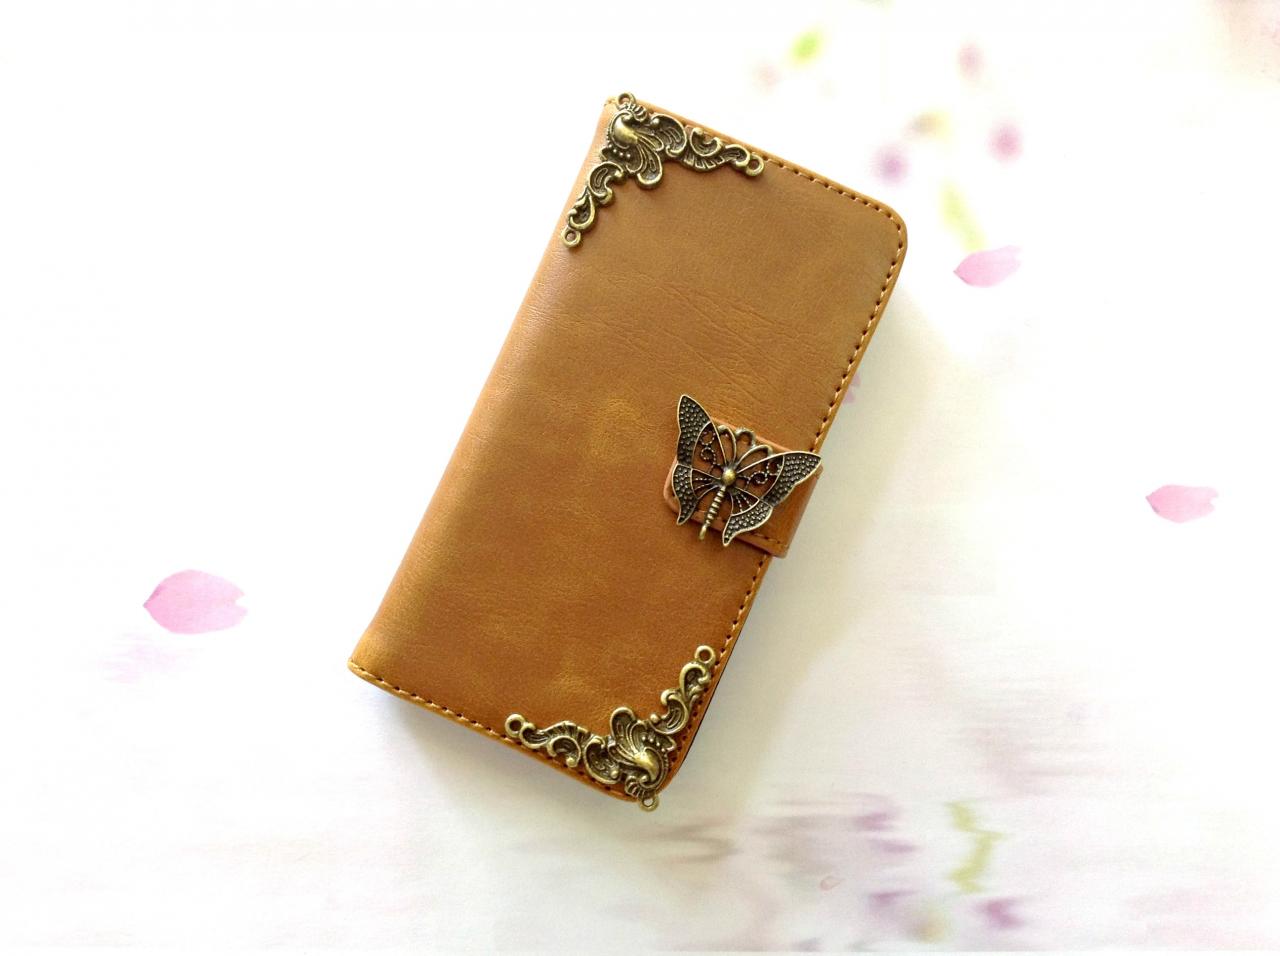 Butterfly Iphone 6 6s 4.7 Leather Wallet Case, Vintage Iphone 6 6s Plus Leather Wallet Case, Iphone Se, 5c, 5, 5s Leather Wallet Case, Samsung